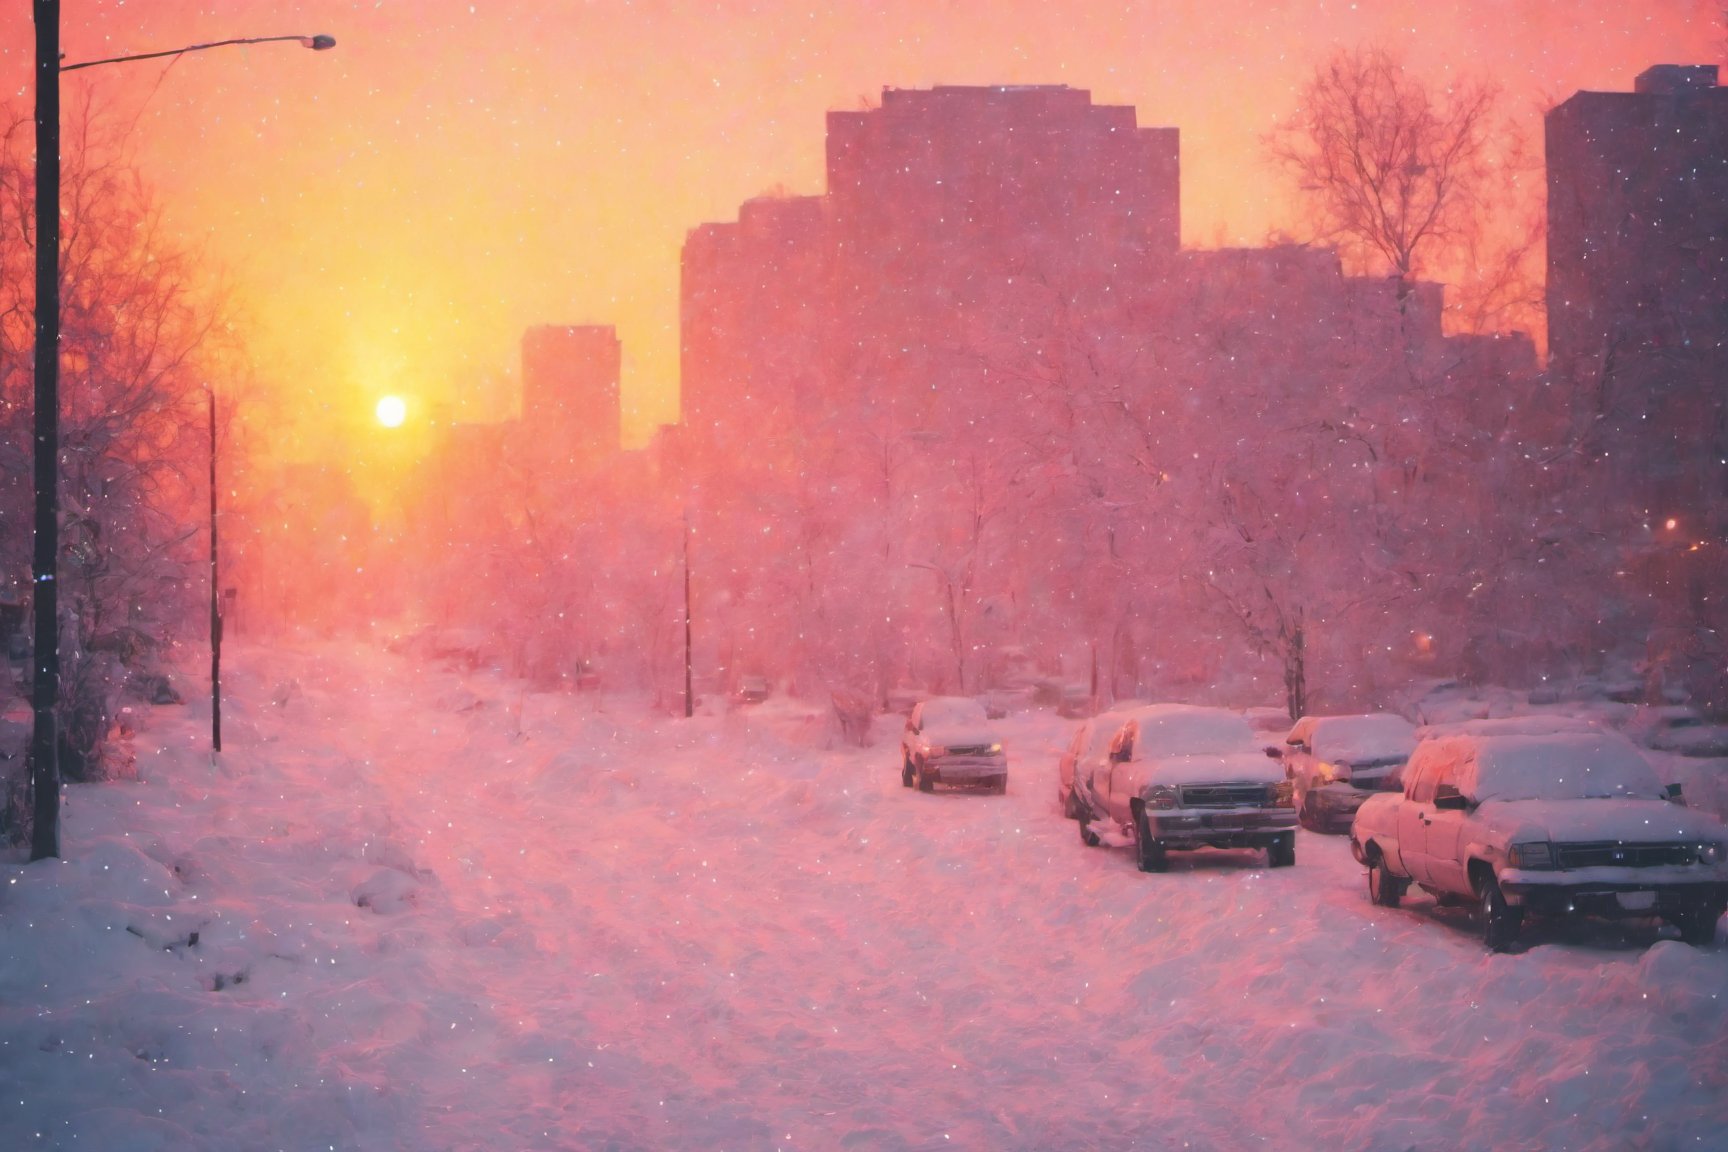 photo in the style of dreamypetra of a snowy city a the sunset 